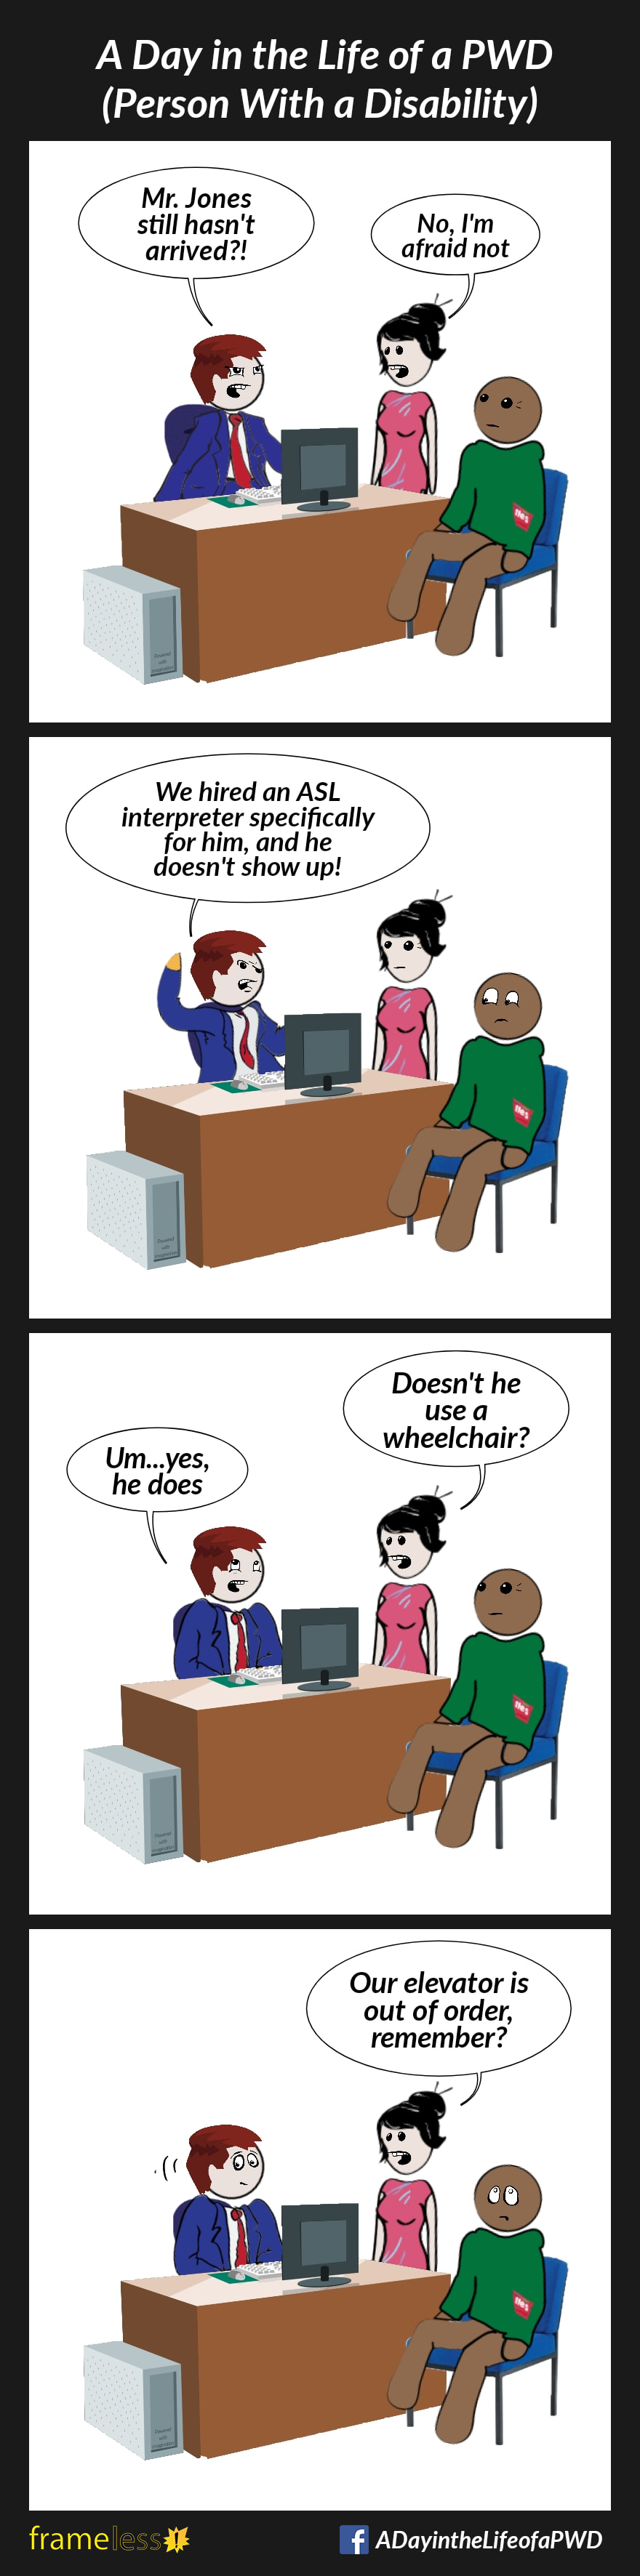 COMIC STRIP 
A Day in the Life of a PWD (Person With a Disability) 

Frame 1:
A man in a suit is sitting behind a desk, talking to his receptionist. Another man is sitting in a chair in front of the desk, waiting patiently.
BOSS (annoyed): Mr. Jones still hasn't arrived?!
RECEPTIONIST: No, I'm afraid not

Frame 2:
BOSS (angry): We hired an ASL interpreter specifically for him, and he doesn't show up! 
The interpreter looks uncomfortable. 

Frame 3:
RECEPTIONIST: Doesn't he use a wheelchair?
BOSS: Um...yes, he does

Frame 4:
RECEPTIONIST: Our elevator is out of order, remember?
The interpreter rolls his eyes.